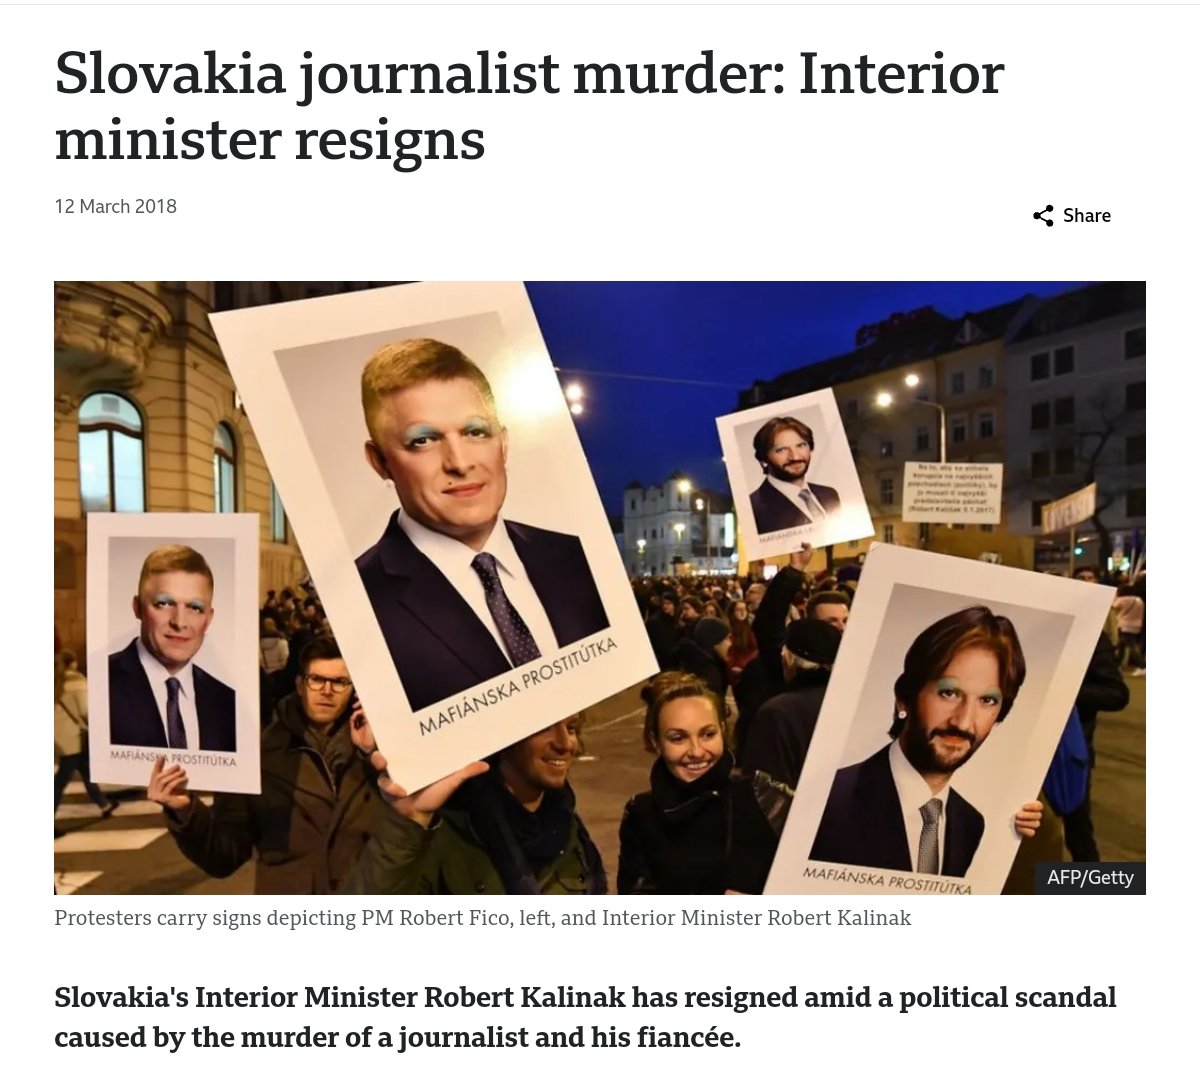 'Jan Kuciak had been investigating alleged mafia infiltration into the country, with questions raised about Fico when it emerged that one of his close aides, was the former business partner of an alleged member of the Ndrangheta clan.' Kuciak & his fiancee were murdered in 2018.